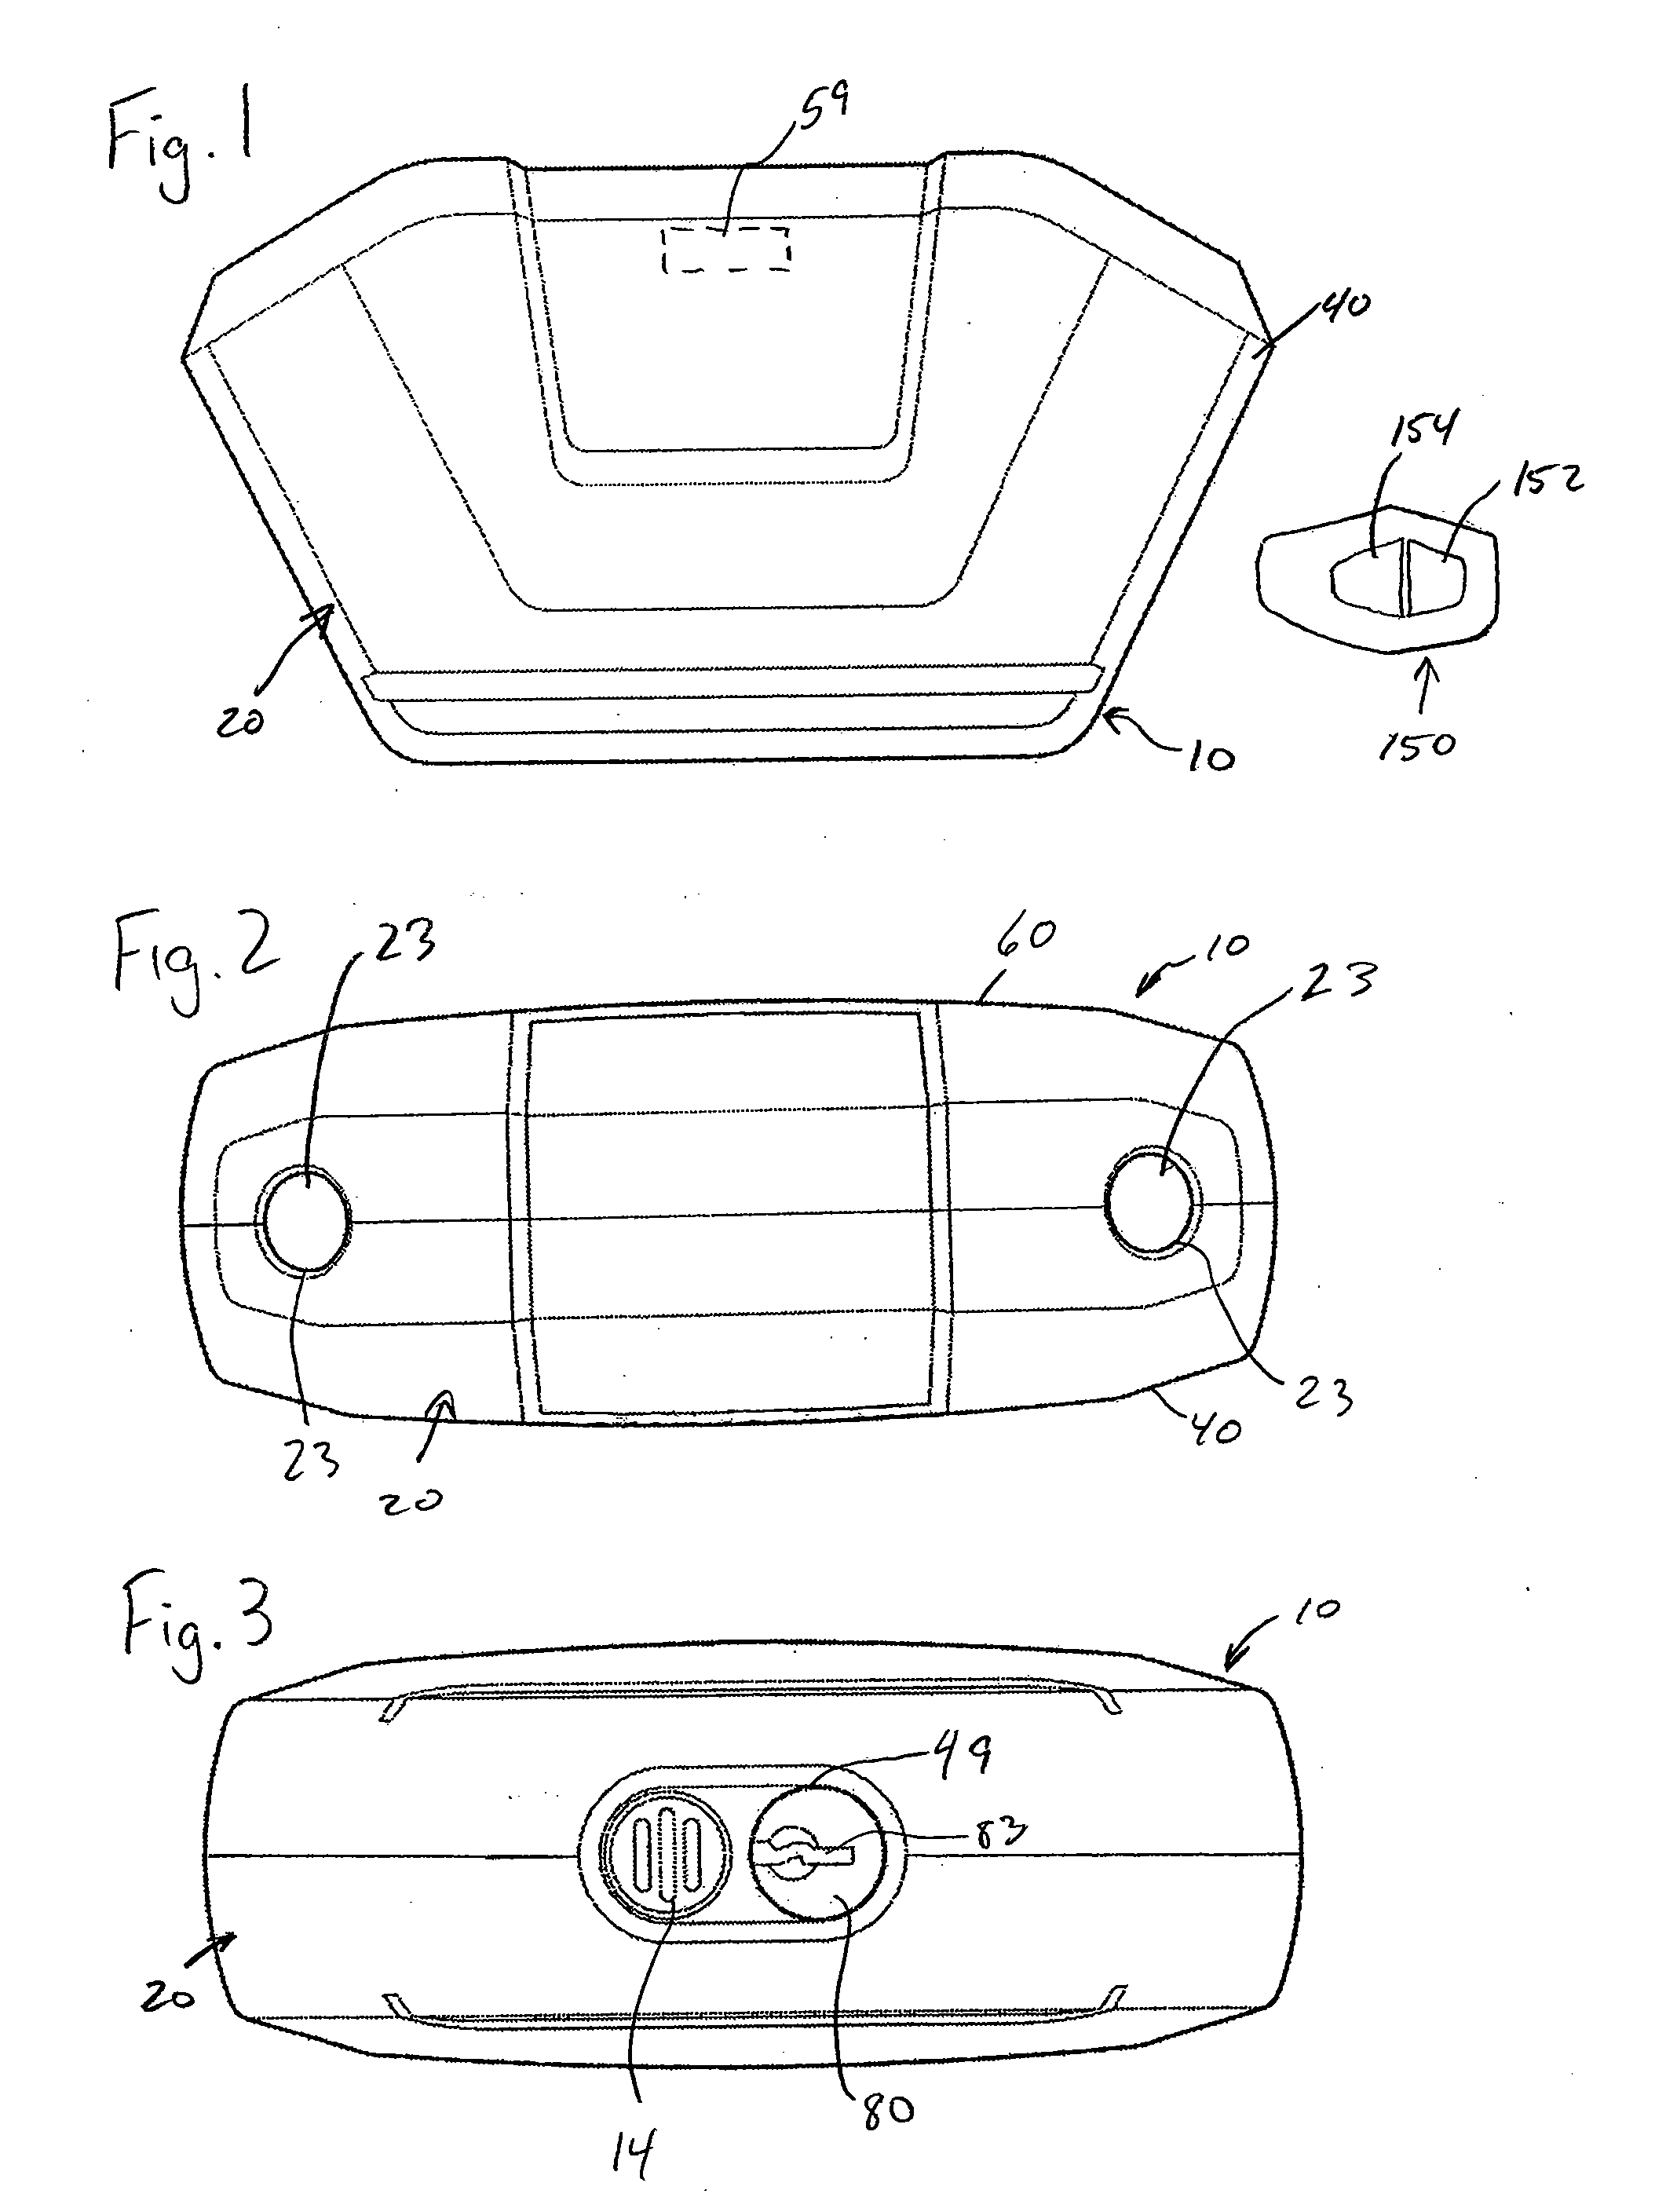 Portable lock with electronic lock actuator